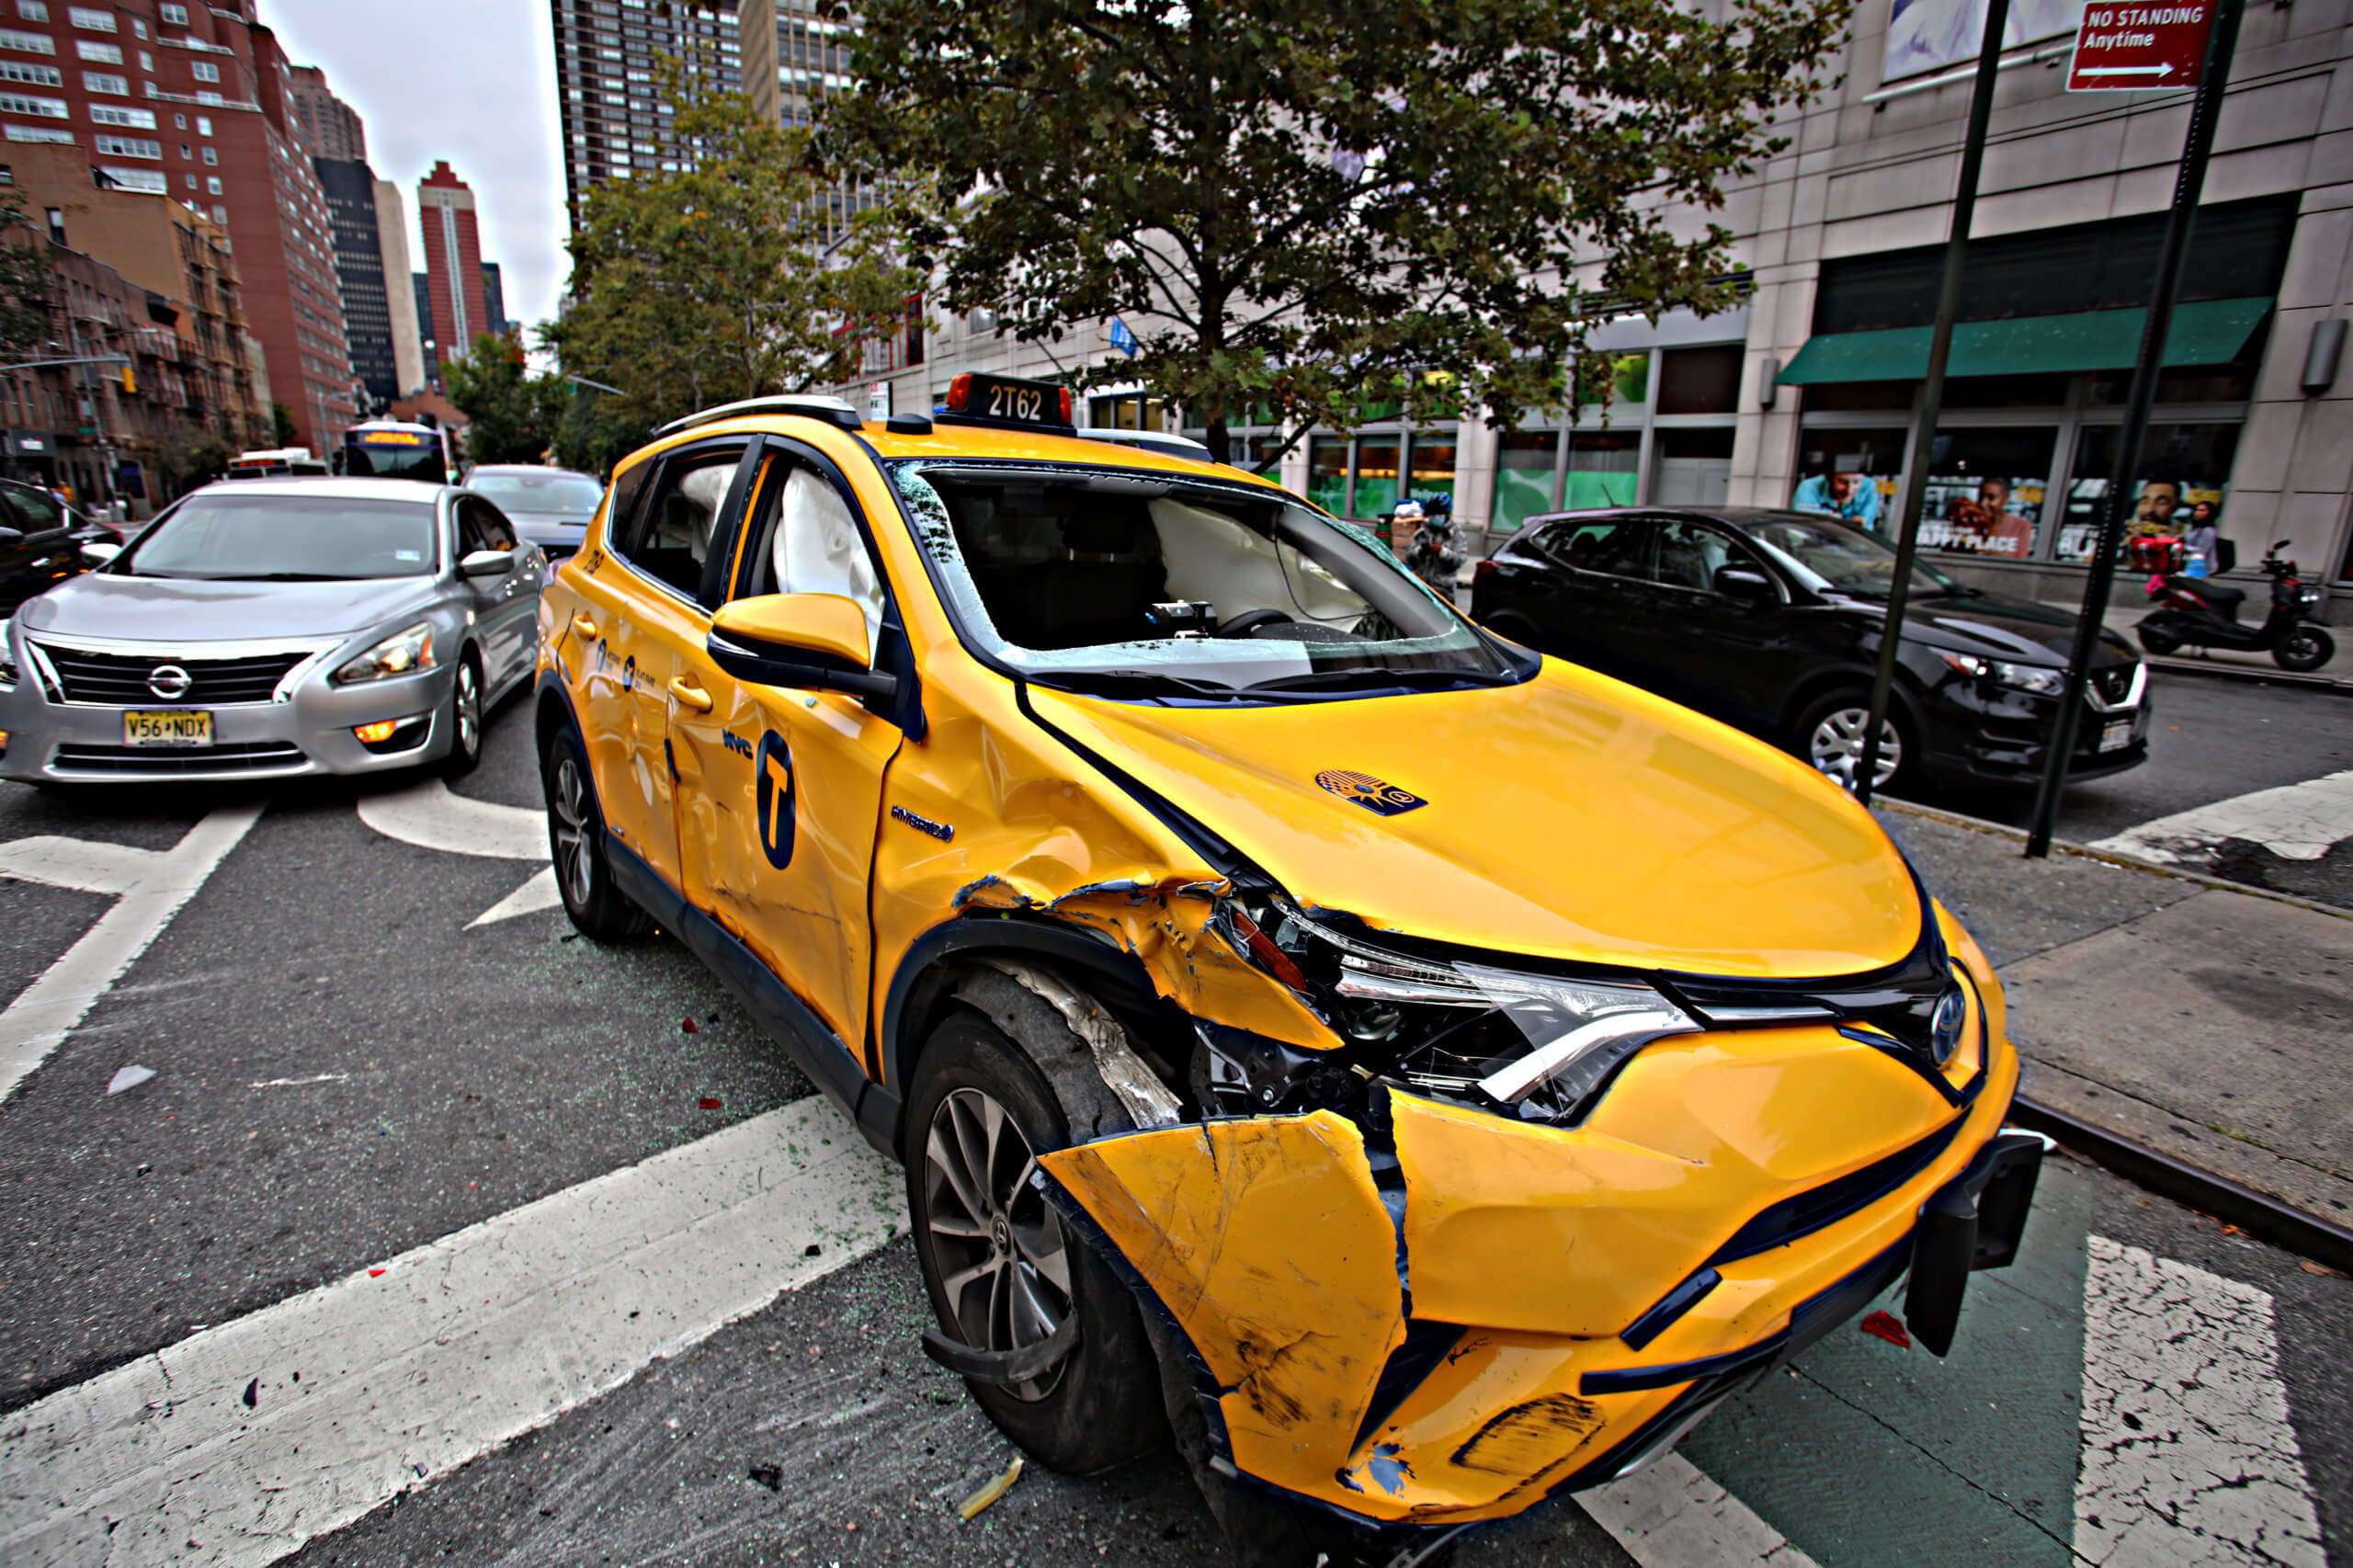 taxi cab accident lawyer staten island